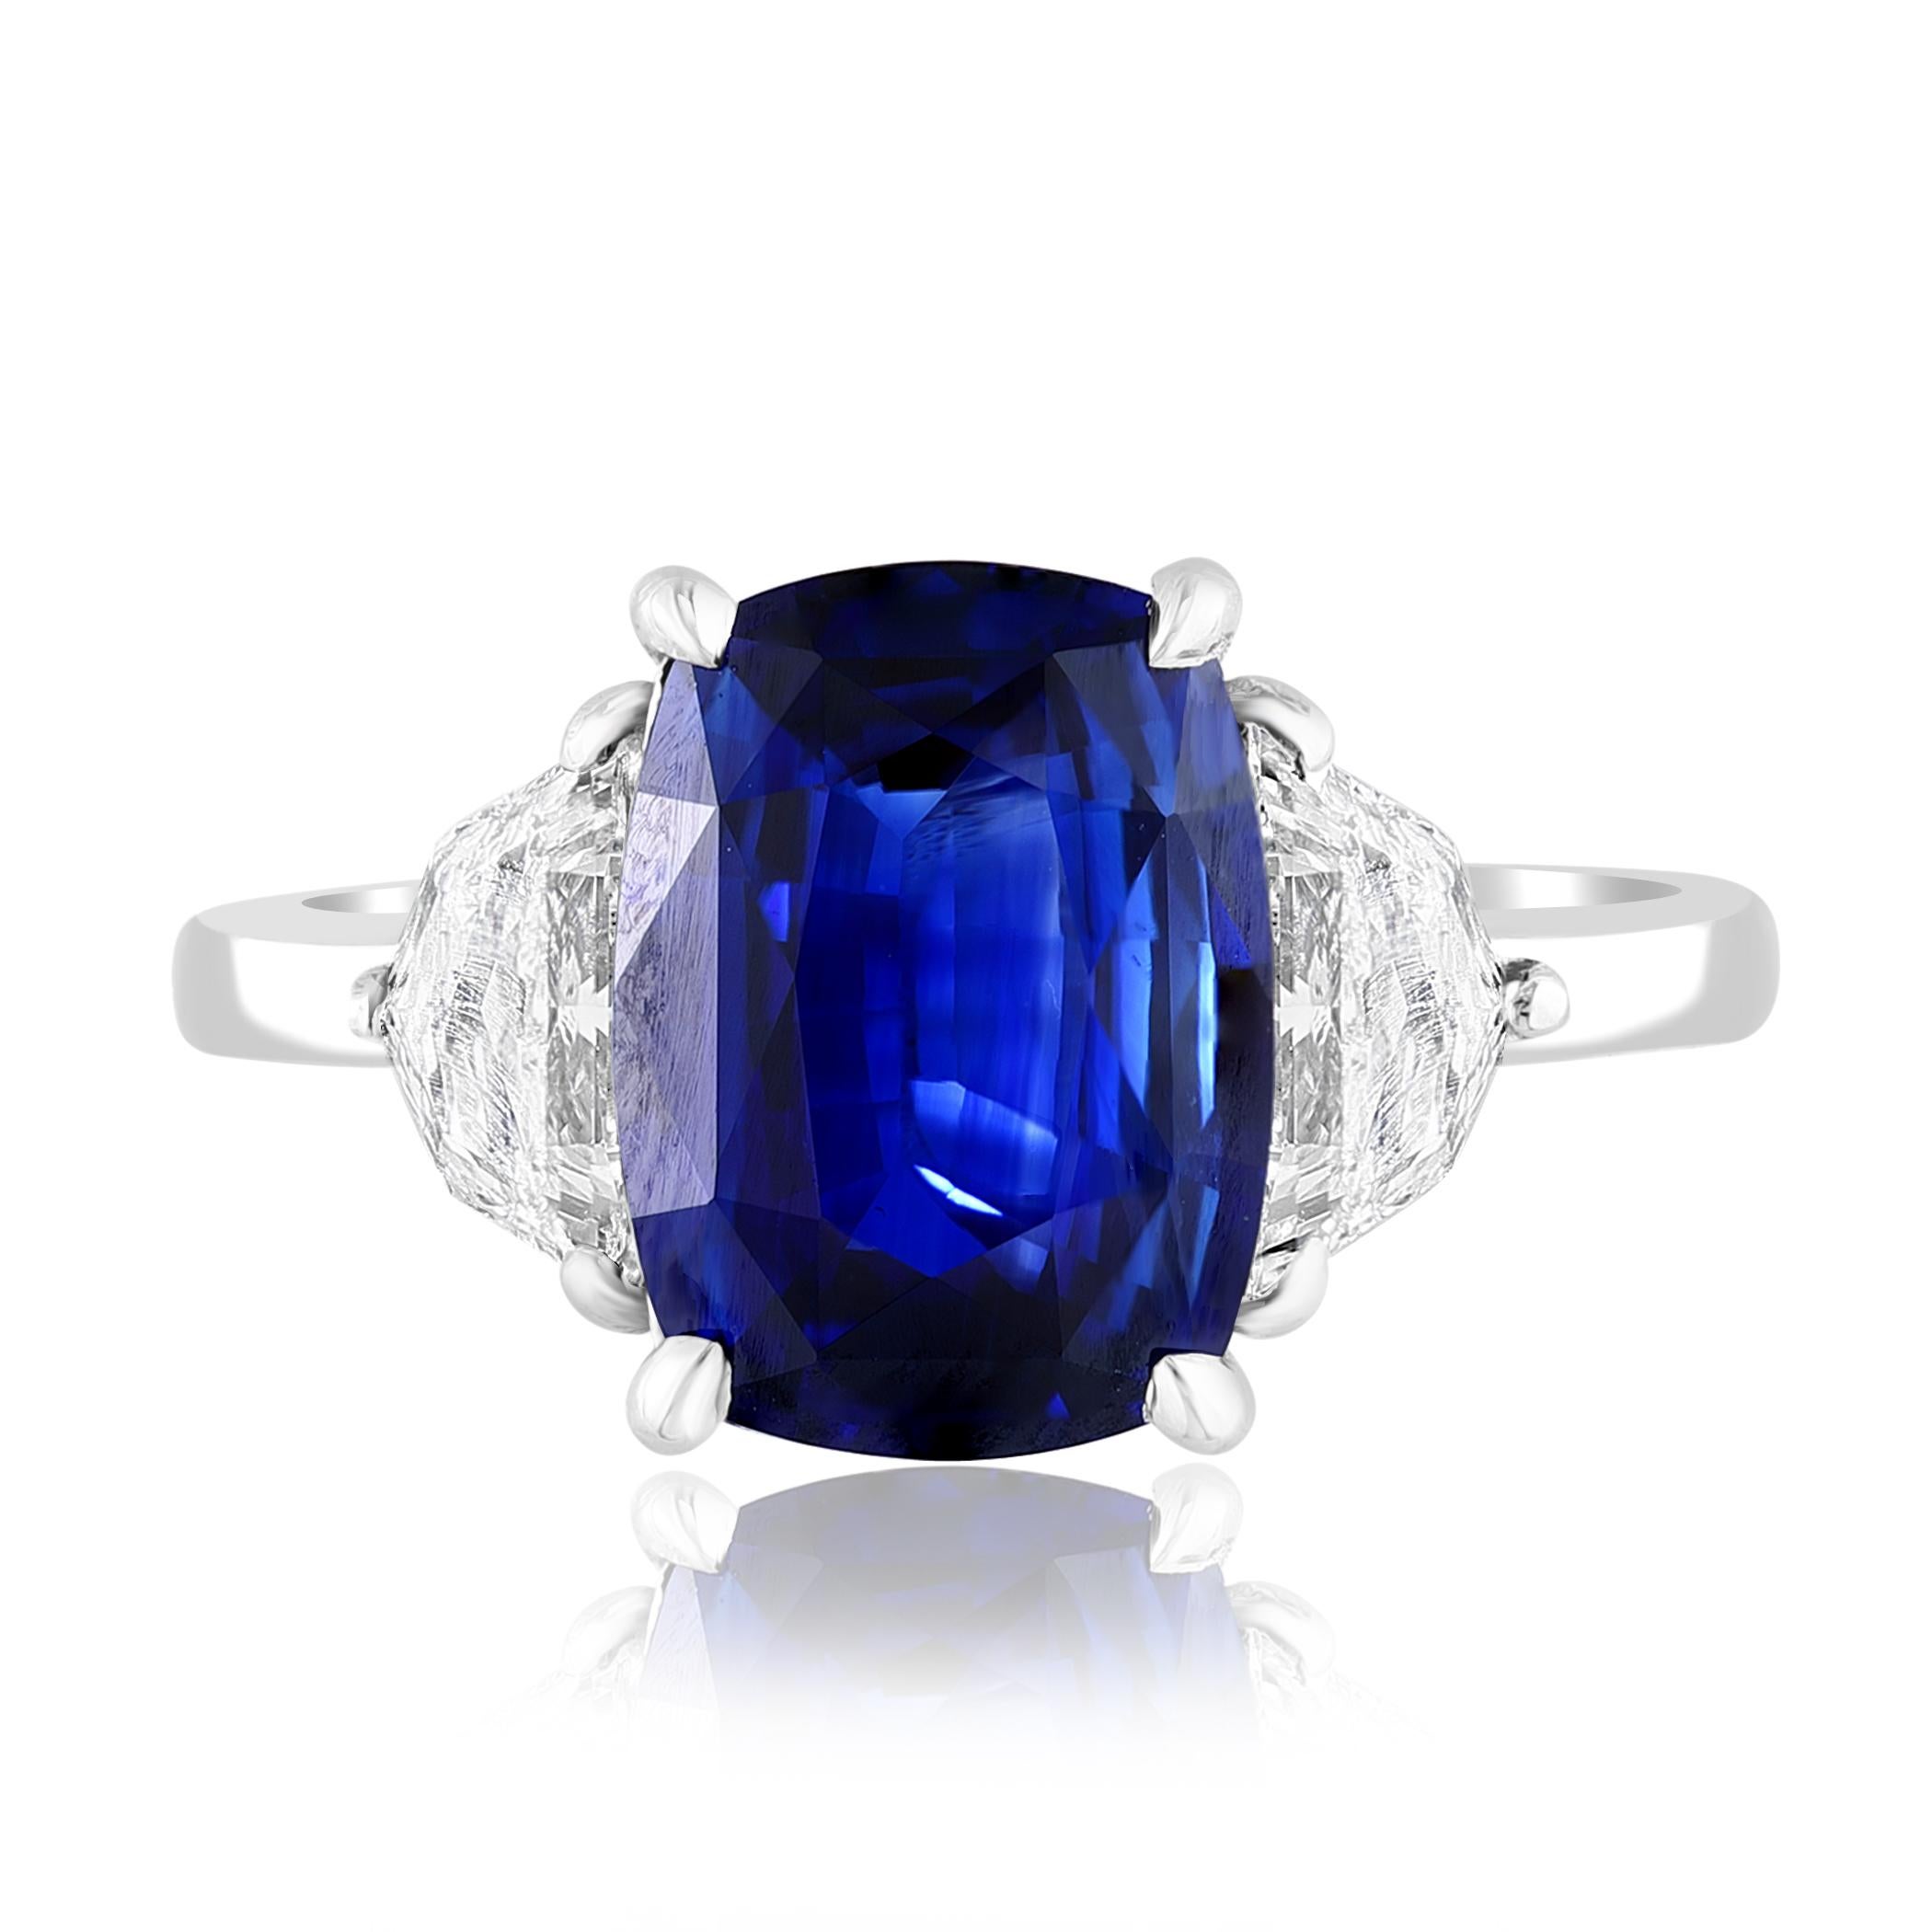 Showcasing Certified Cushion cut, Vibrant color Blue Sapphire weighing 3.54 carats, flanked by two brilliant cut shield diamonds weighing 0.72 carats total. Elegantly set in a polished platinum composition.